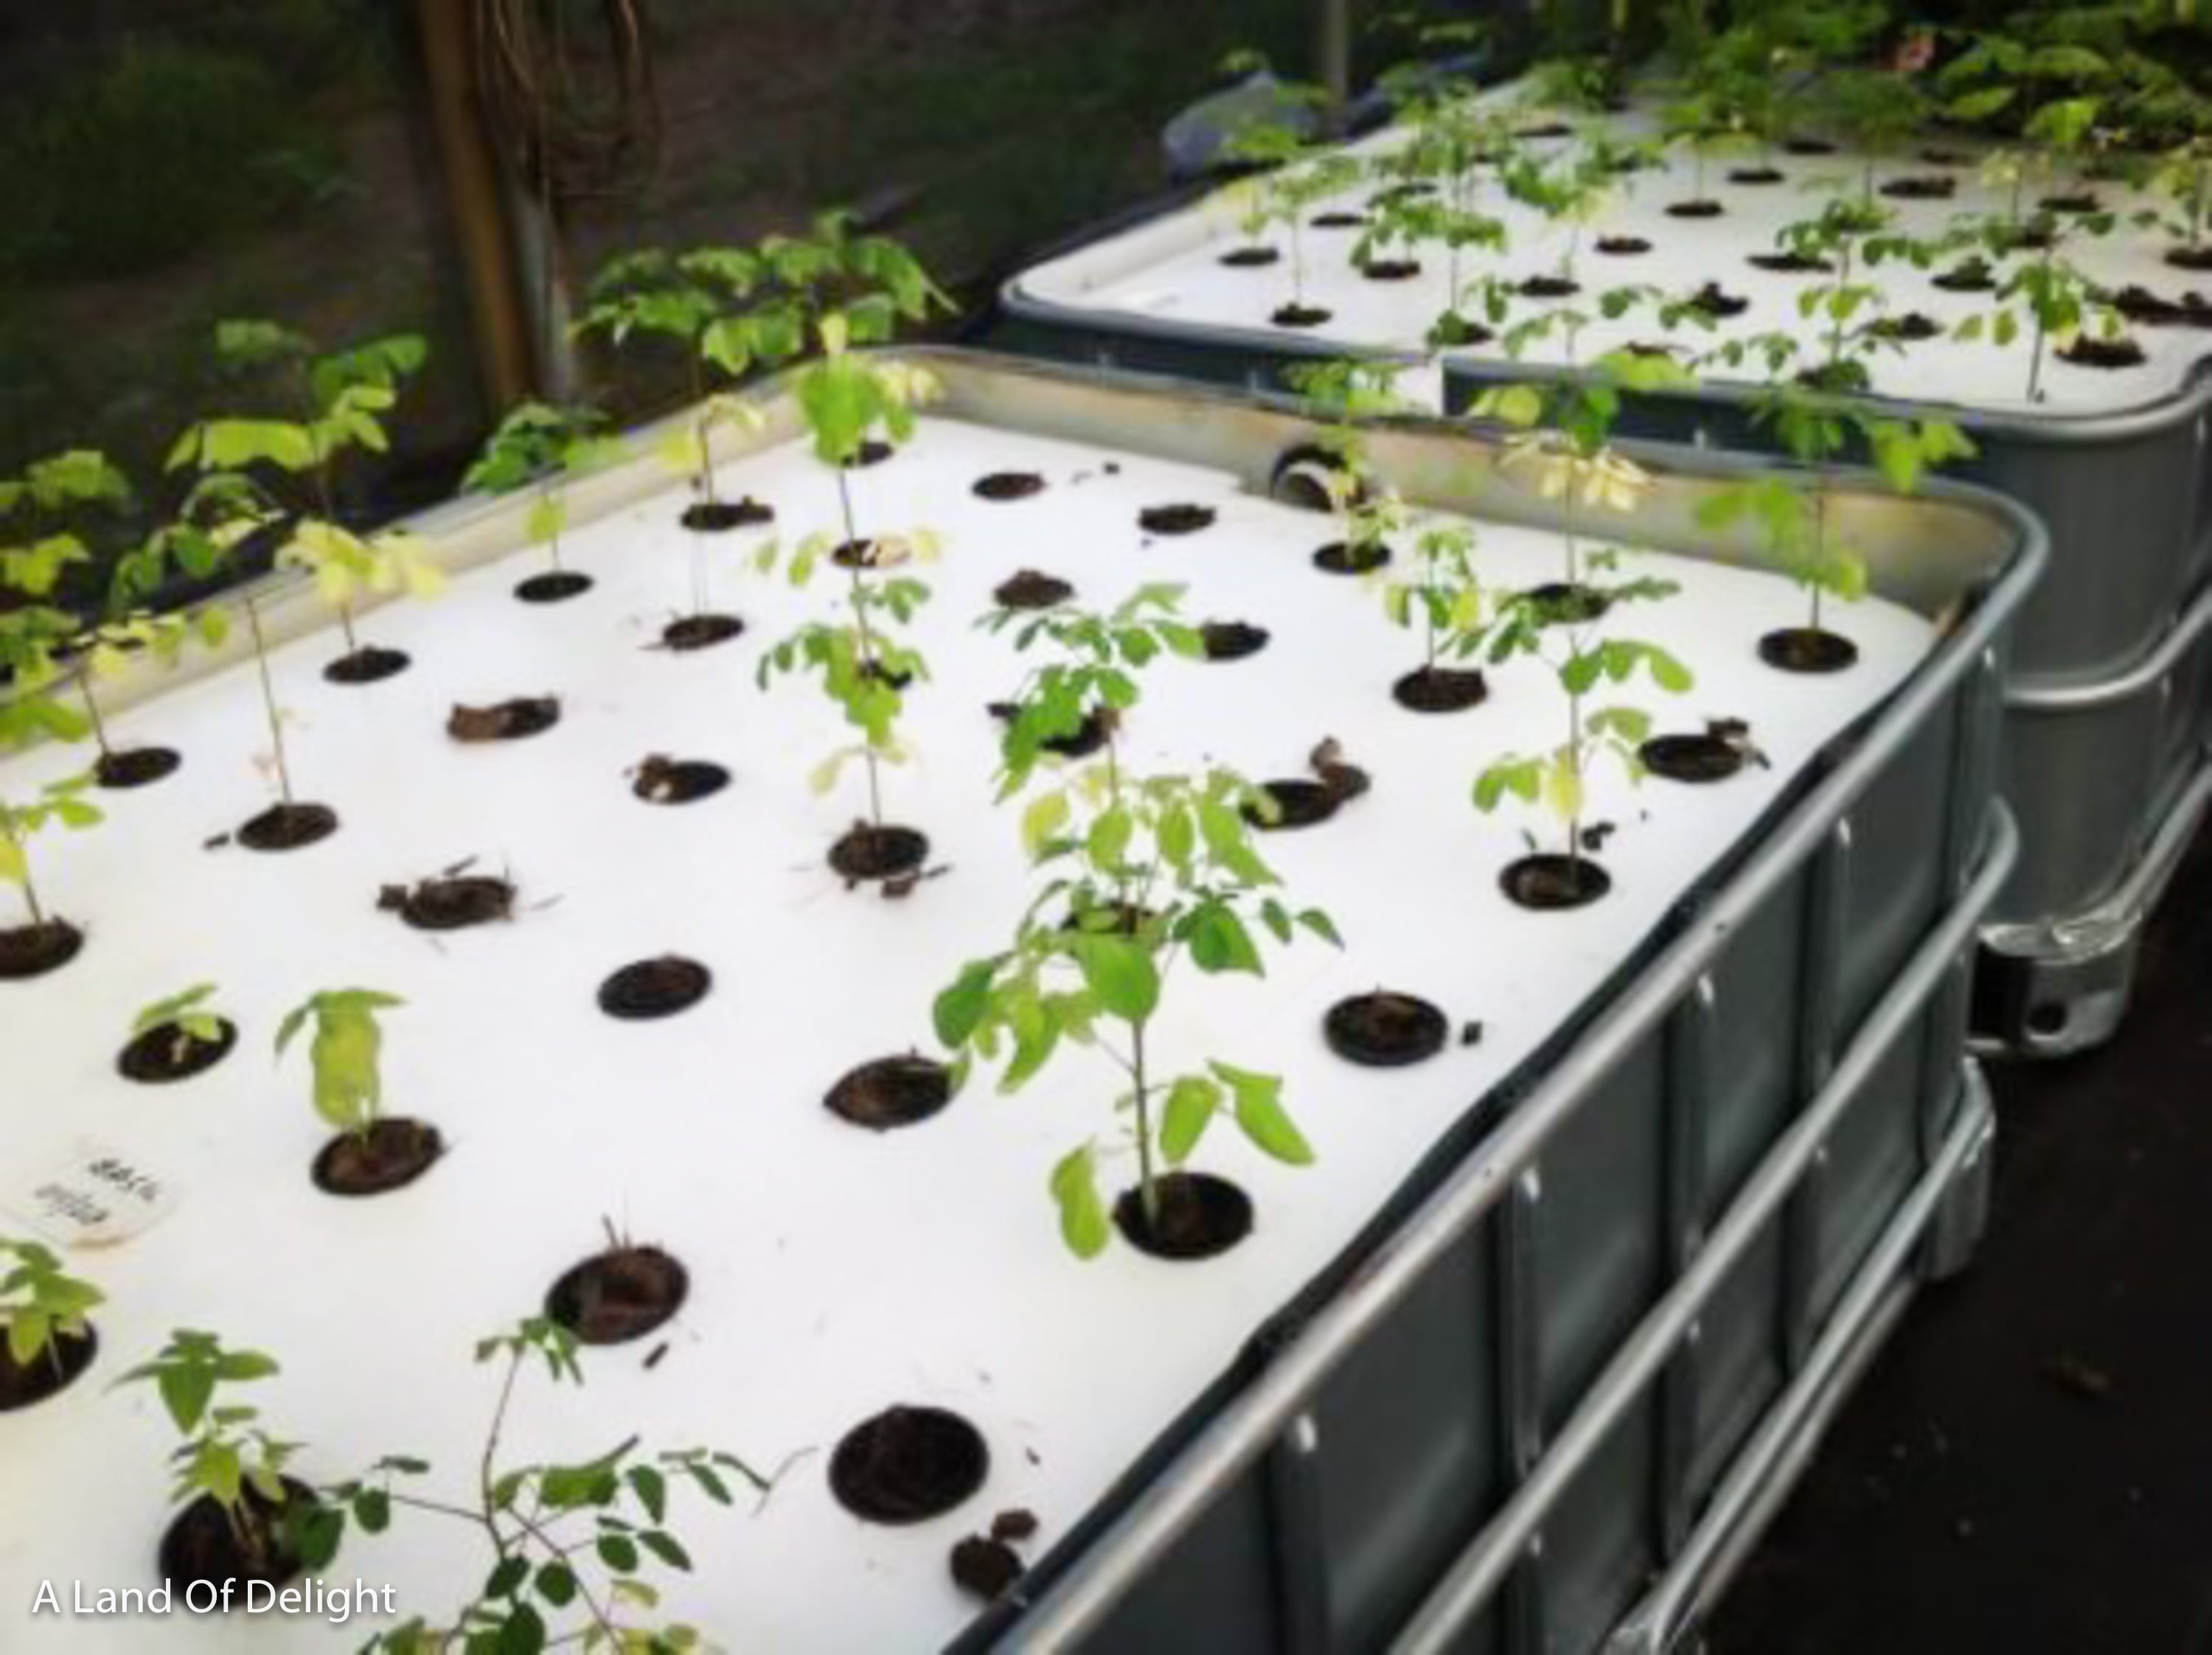 Aquaponics 6-Bed Self Sustaining Garden System with small plants sprouting